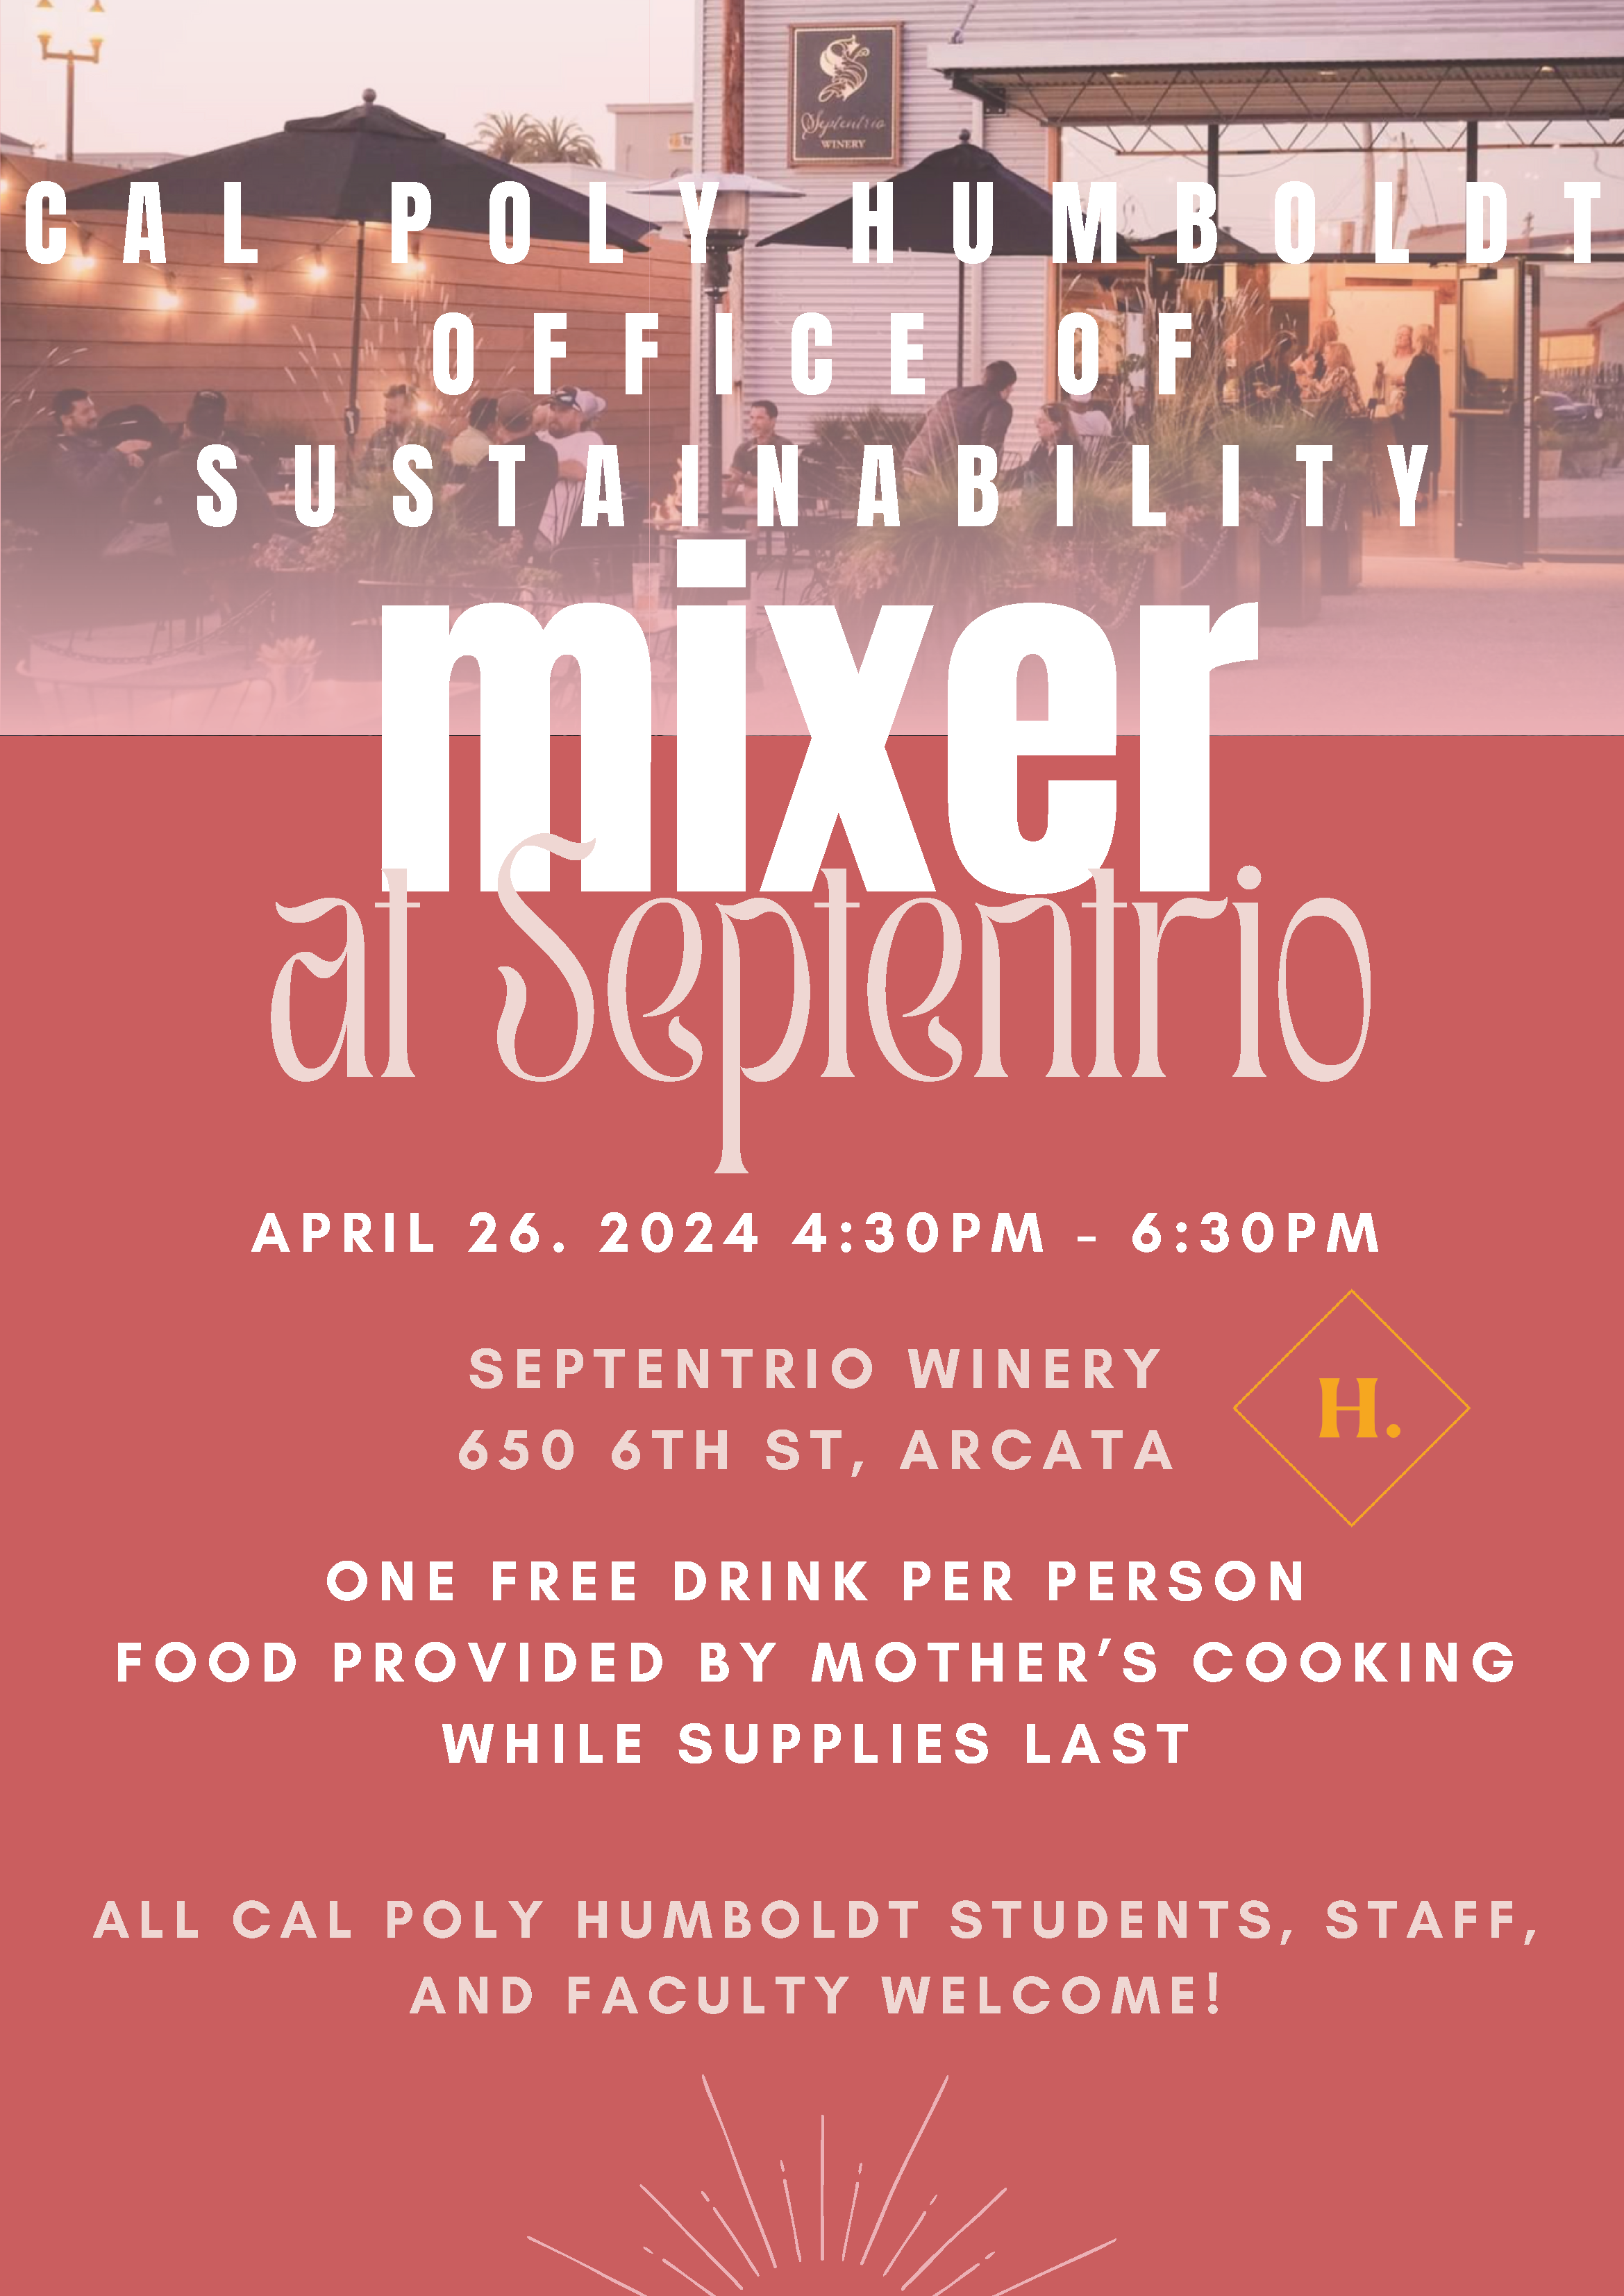 Flyer is for Sustainability Mixer at Septentrio Winery April 26 4:30- 6:30pm 650 6th Street, Arcata, CA 95521